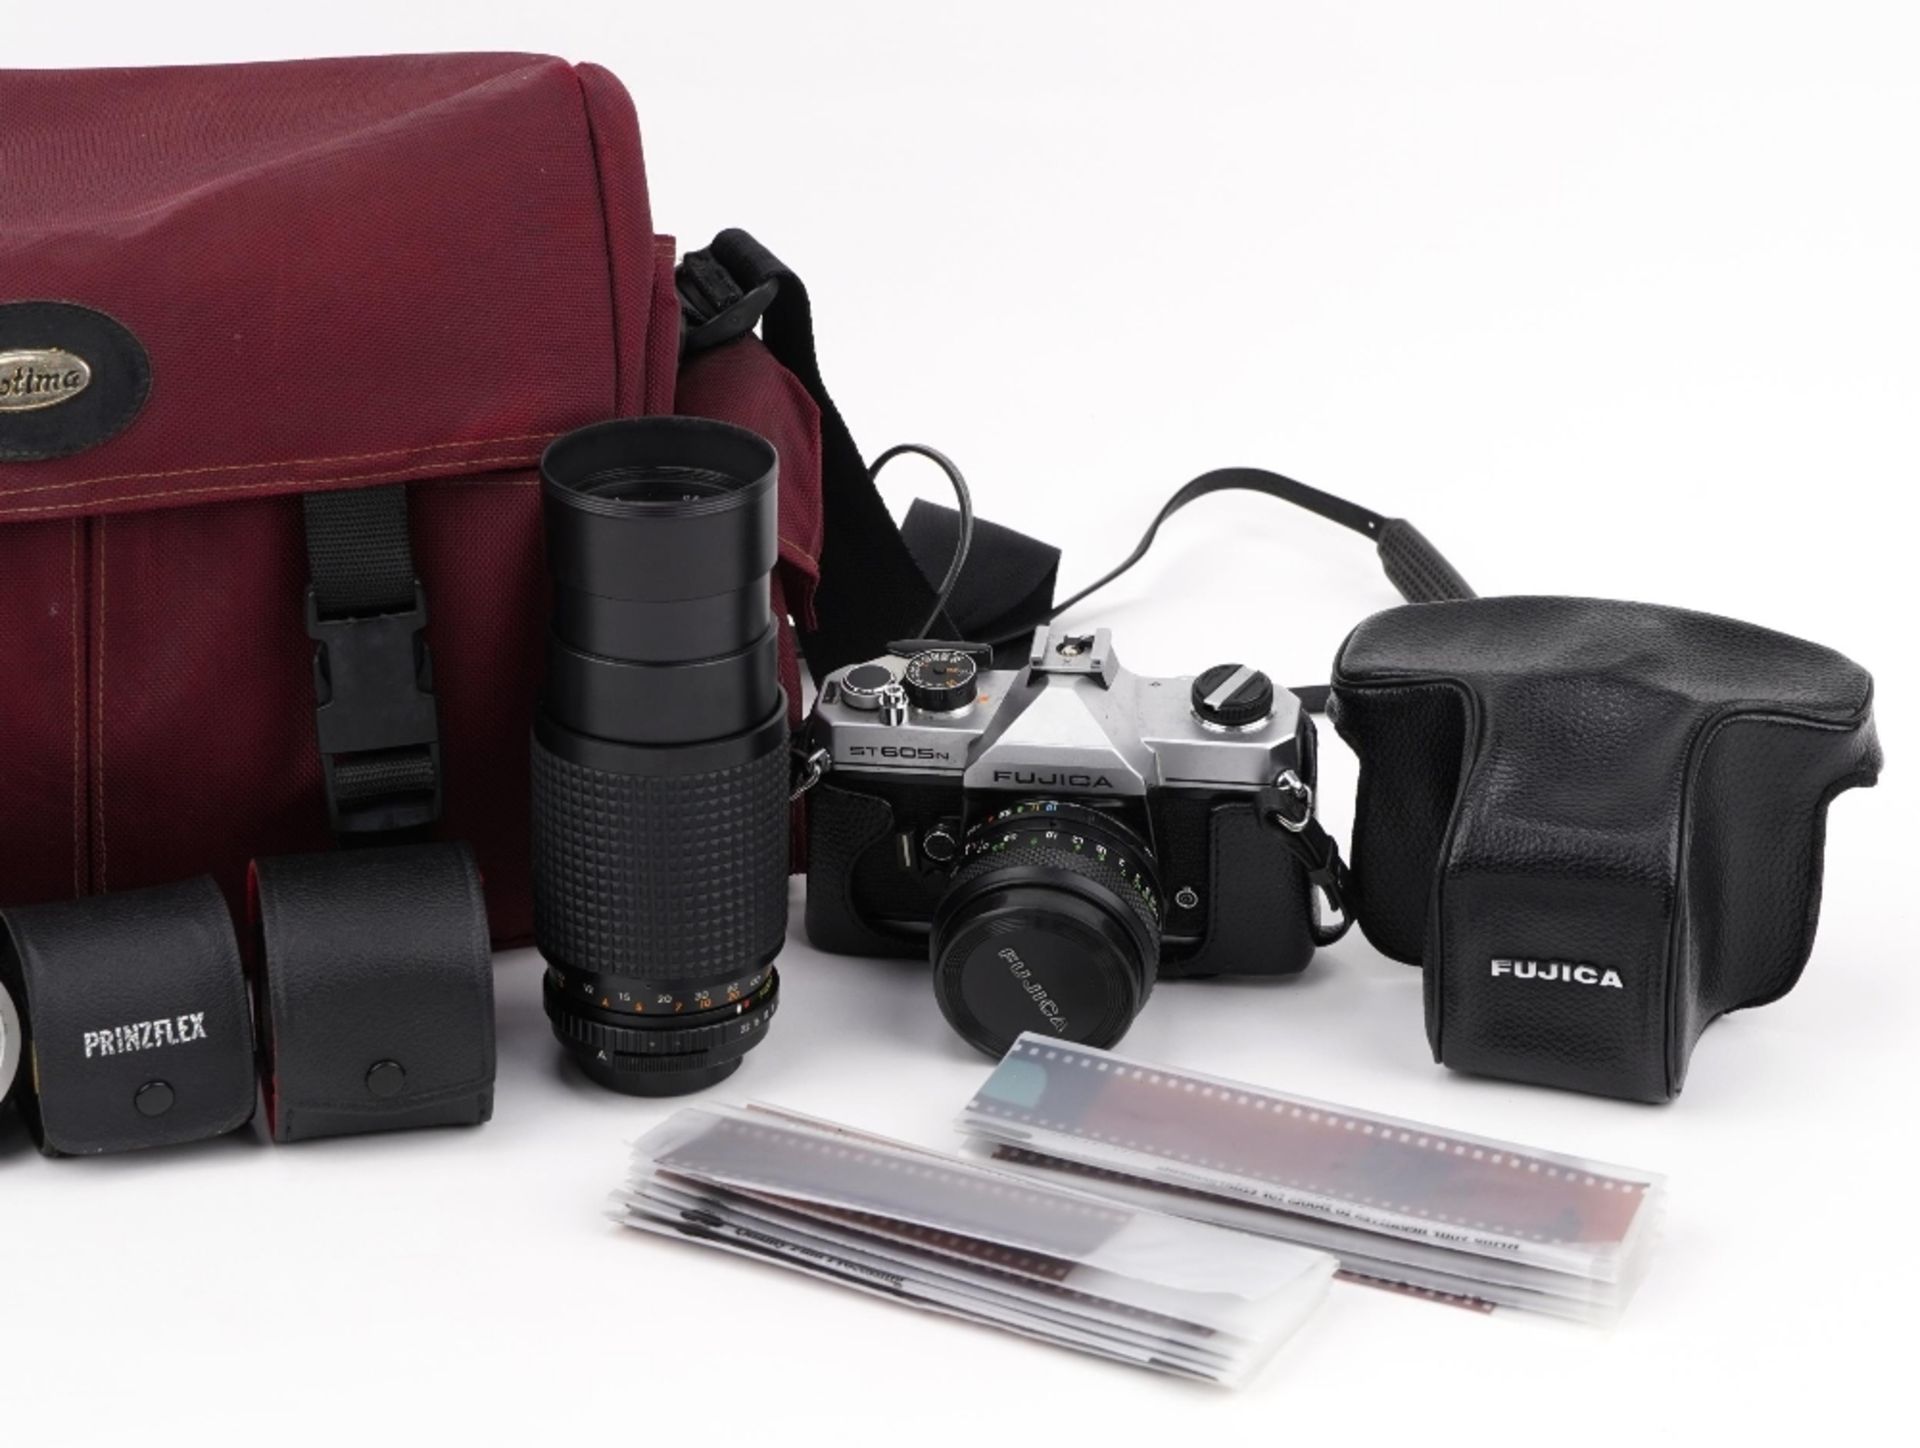 Fujica ST 605N SLR camera with 55mm lens, Osawa 80-205mm lens, accessories and carry bag : For - Image 3 of 3